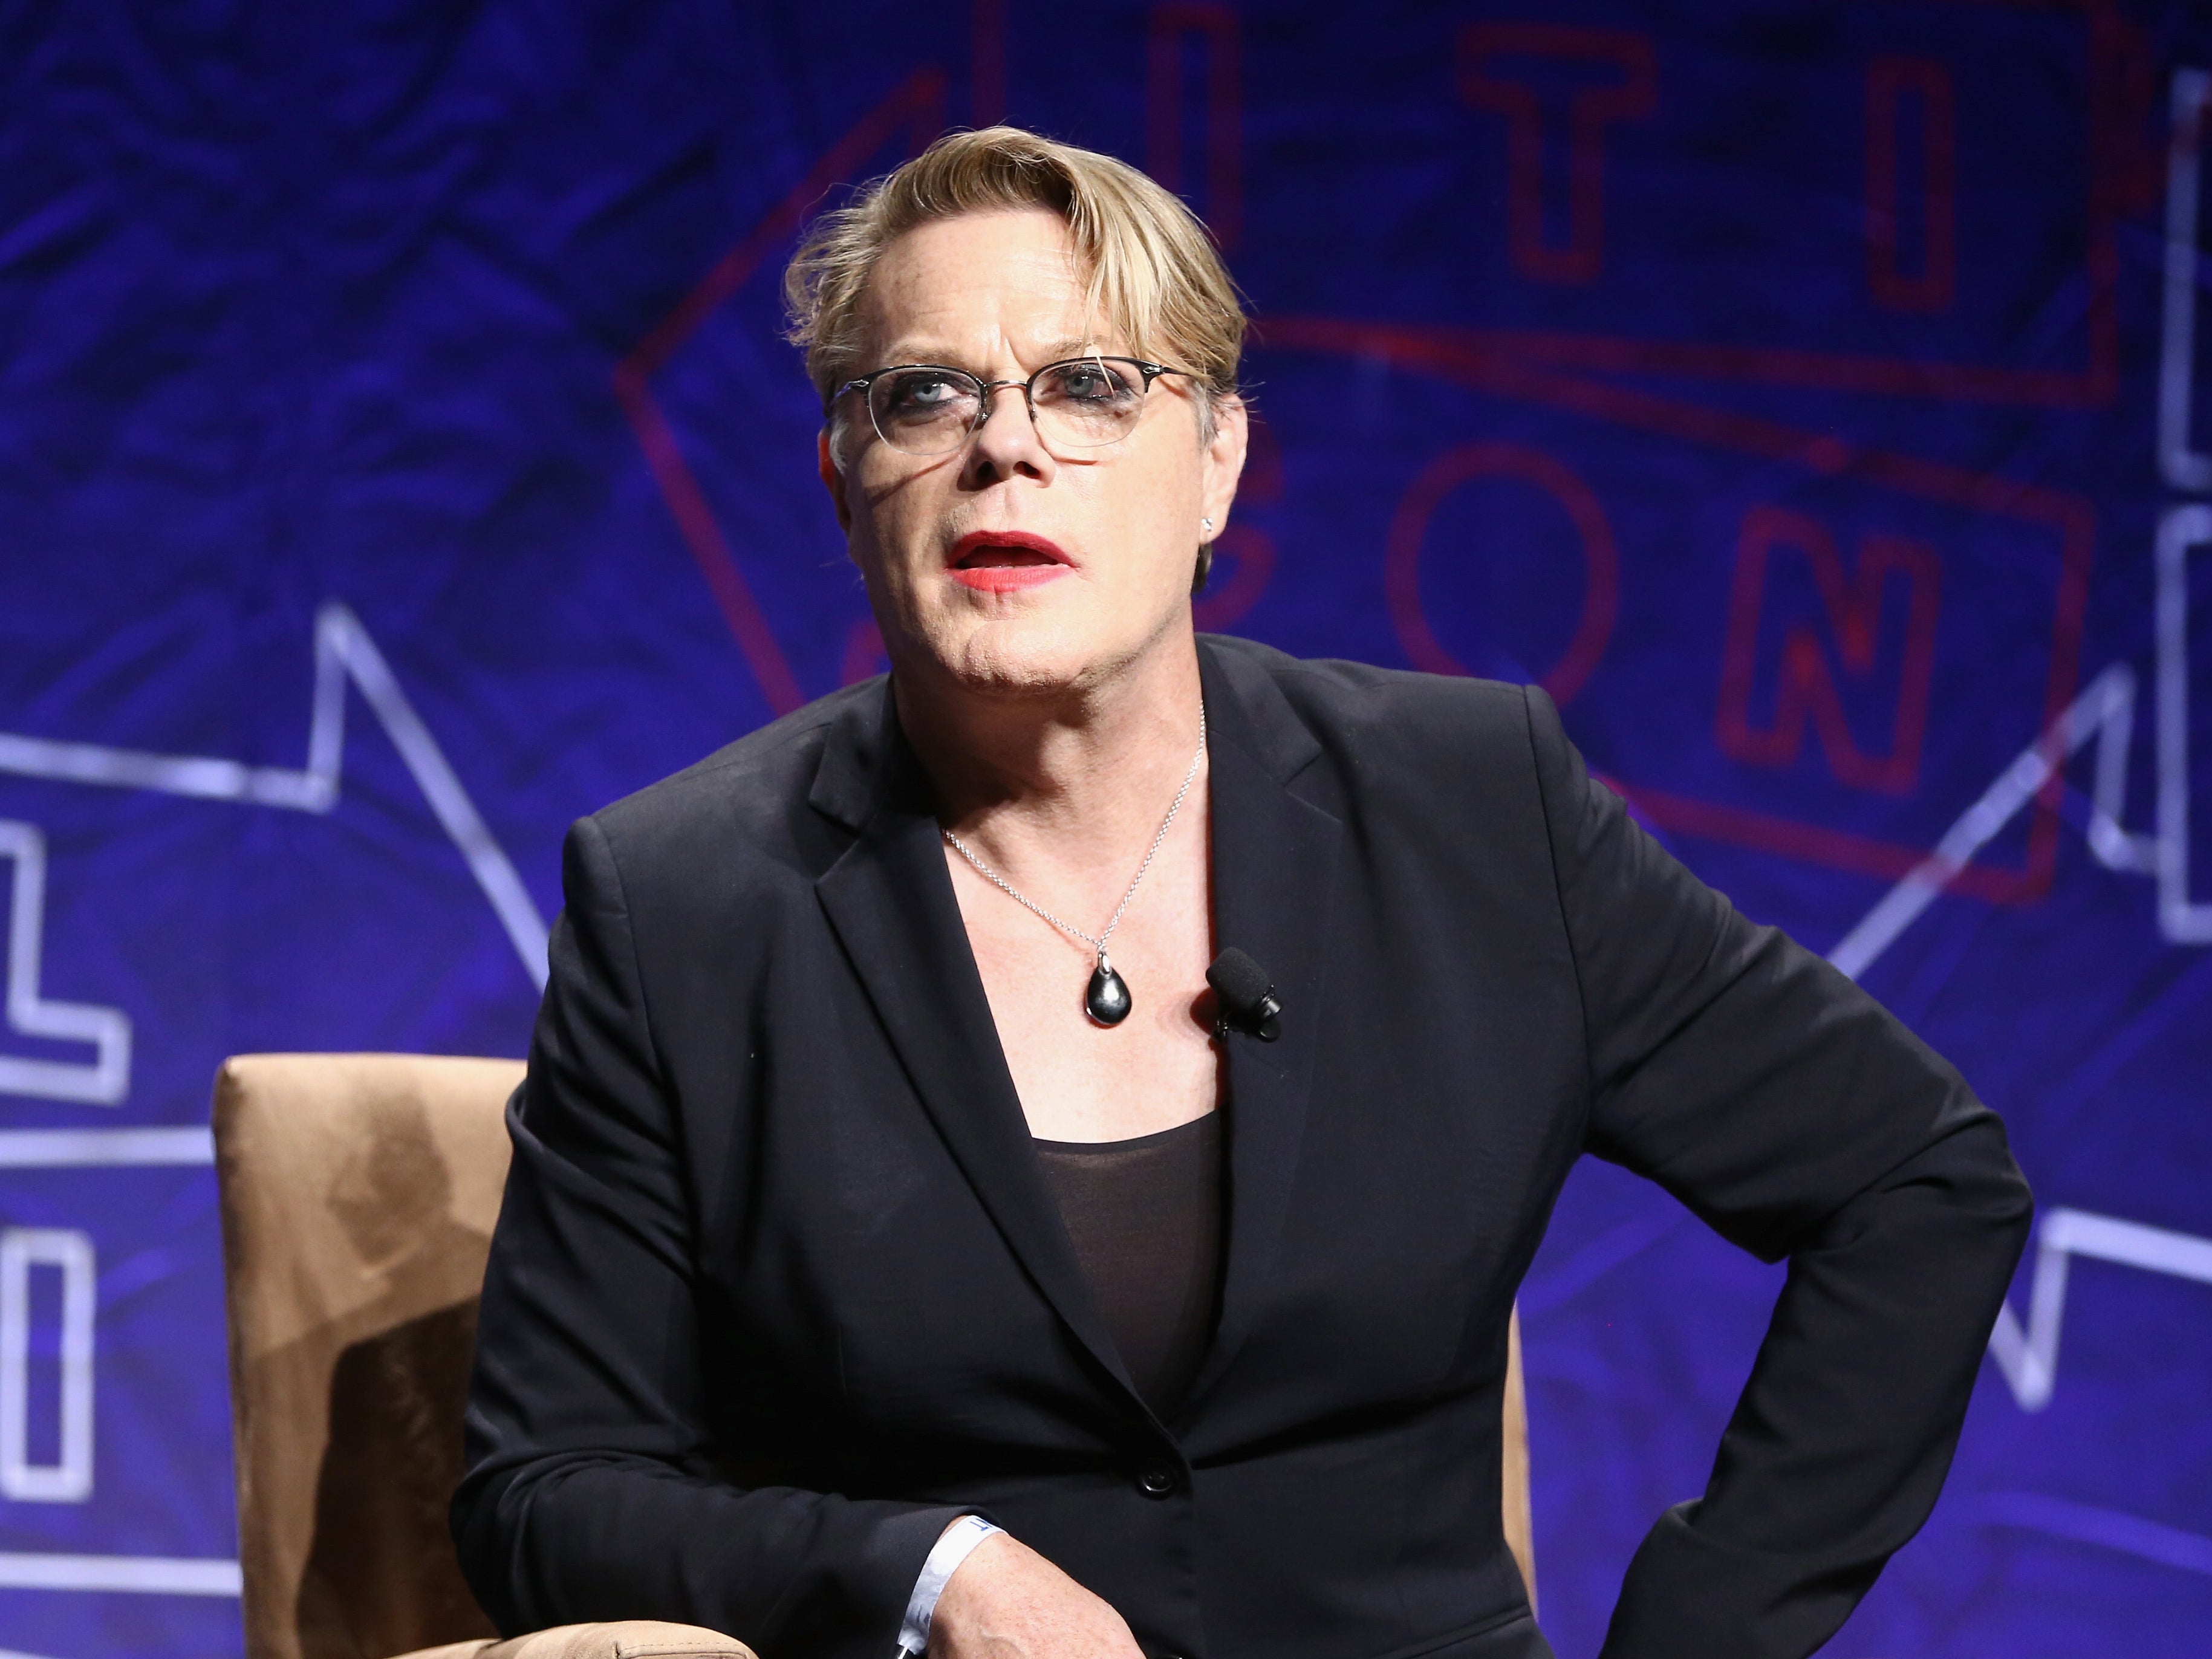 Eddie Izzard has said she fears being trans may affect her chances of ever becoming a Labour MP